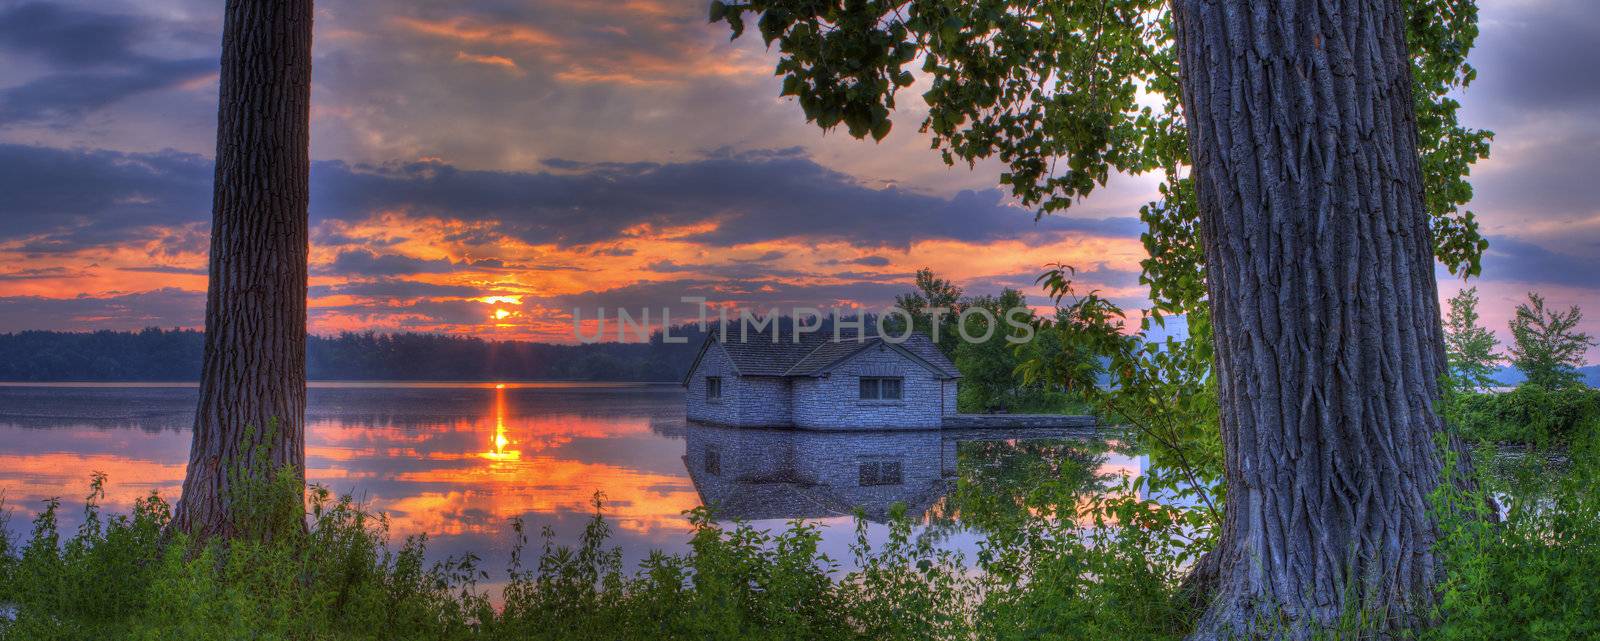 Panorama of a sunrise and pump house utility on a lake.